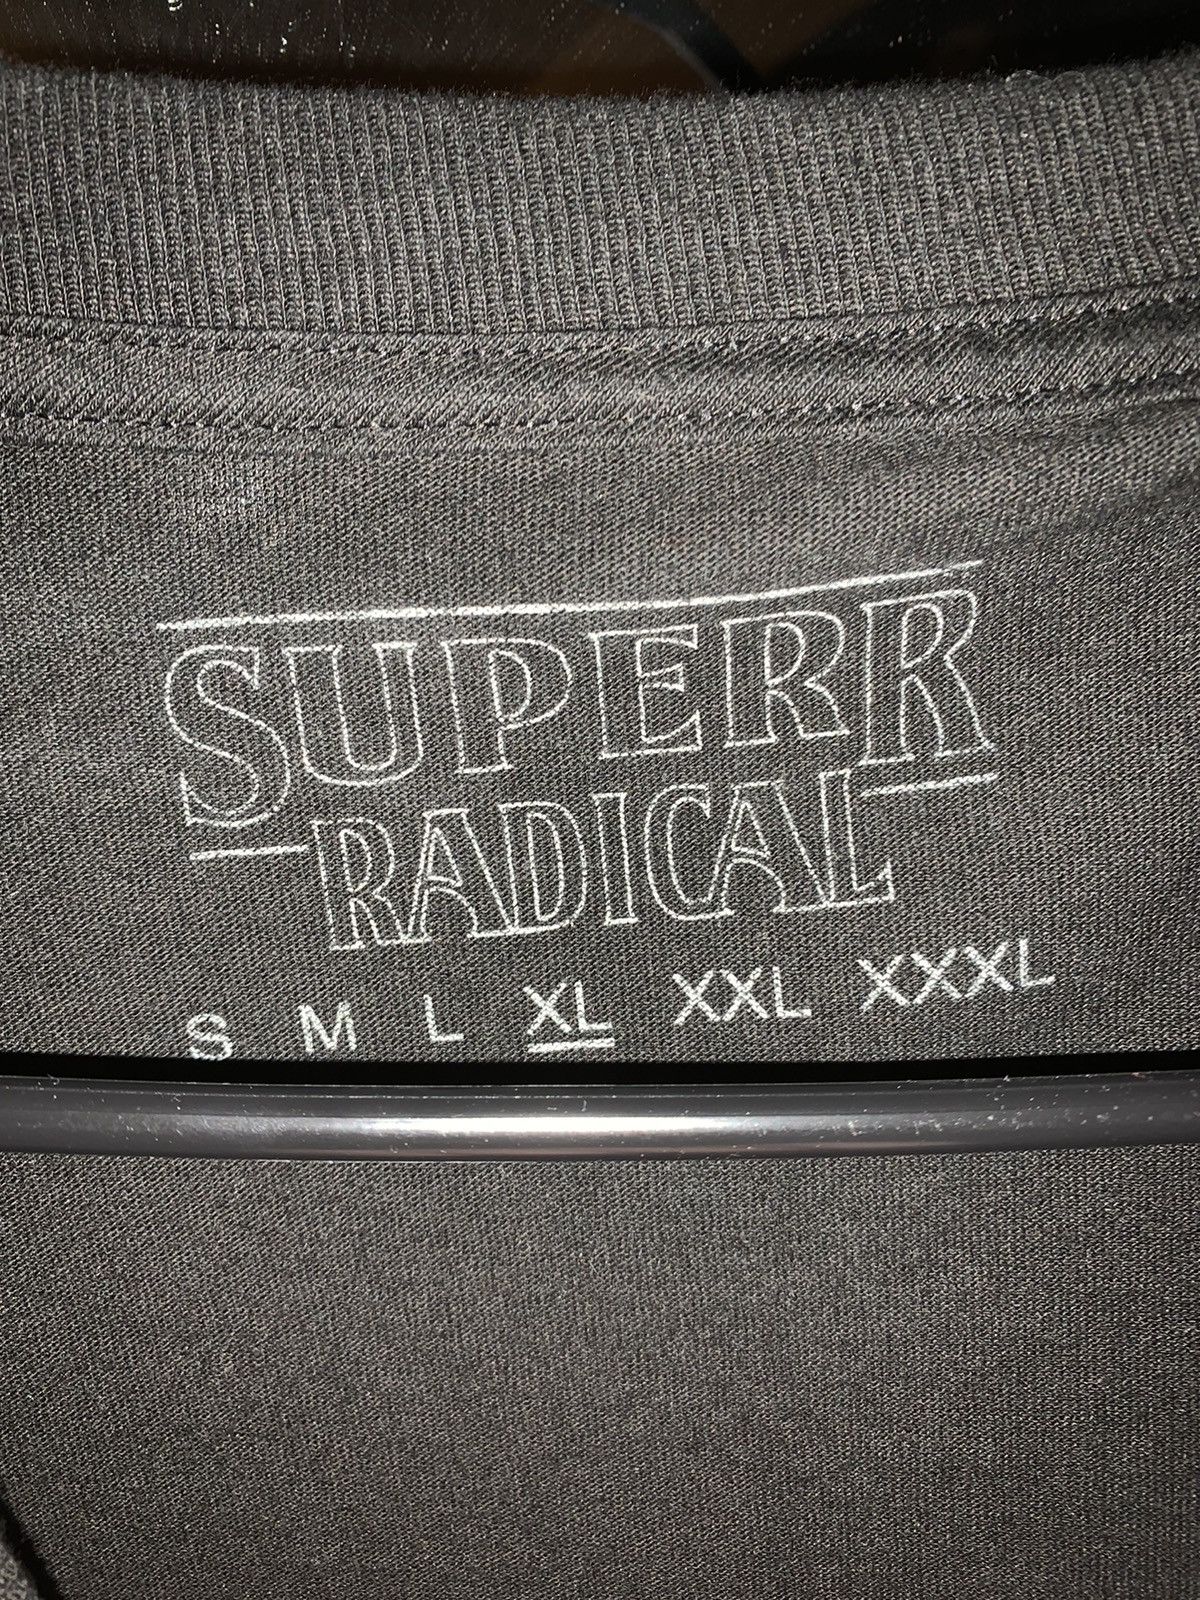 Superrradical Superrradical hellboy tee Size US XL / EU 56 / 4 - 2 Preview